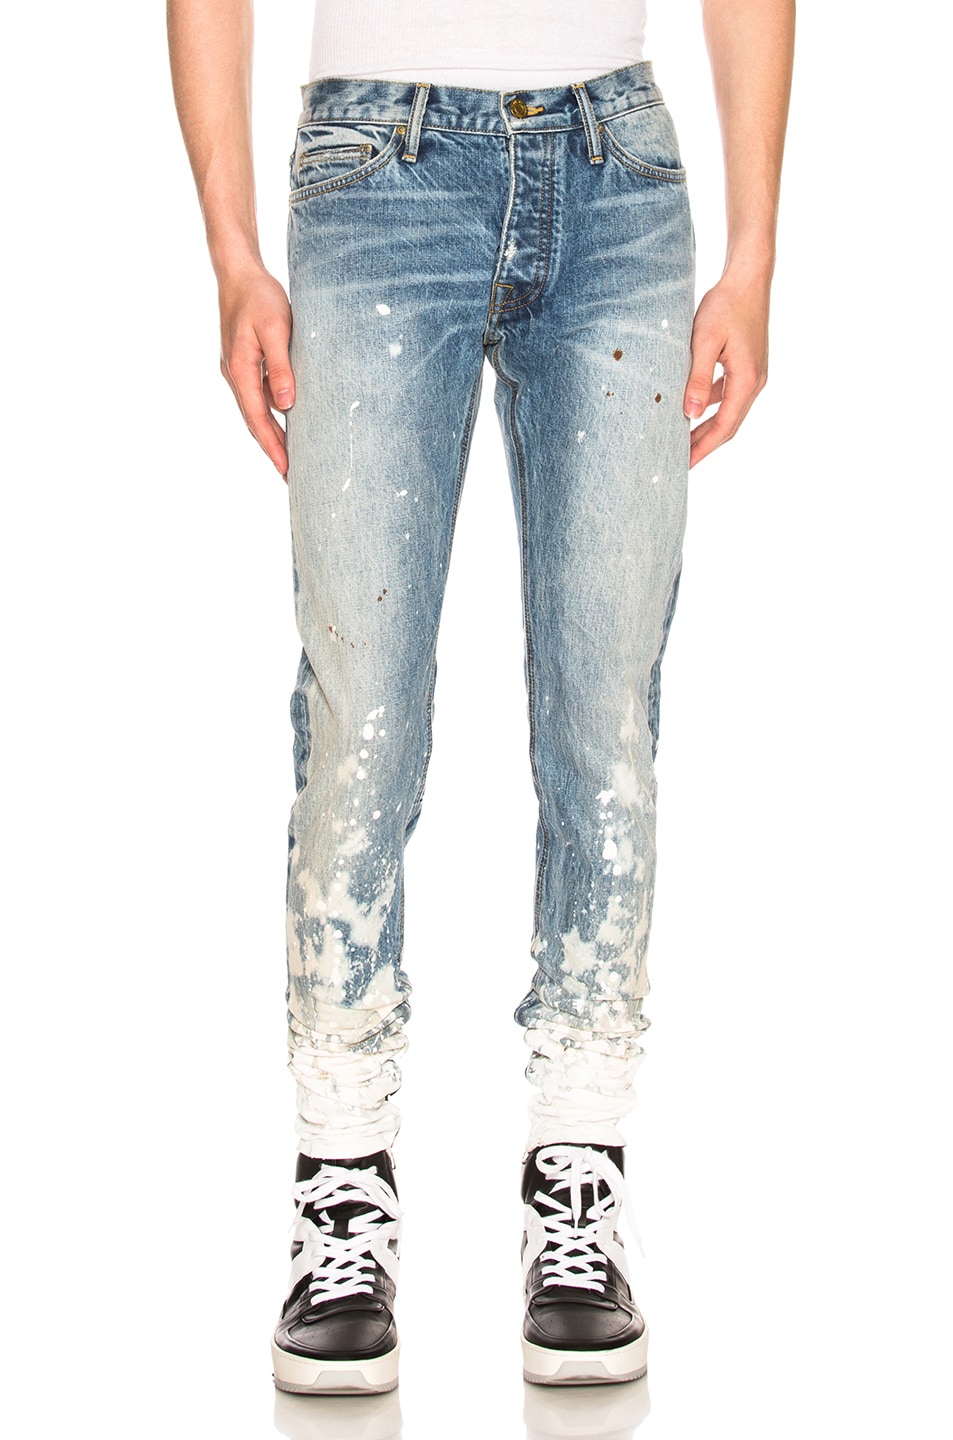 FEAR OF GOD SKINNY-FIT ZIP-DETAILED PAINTED SELVEDGE DENIM JEANS, BLUE ...